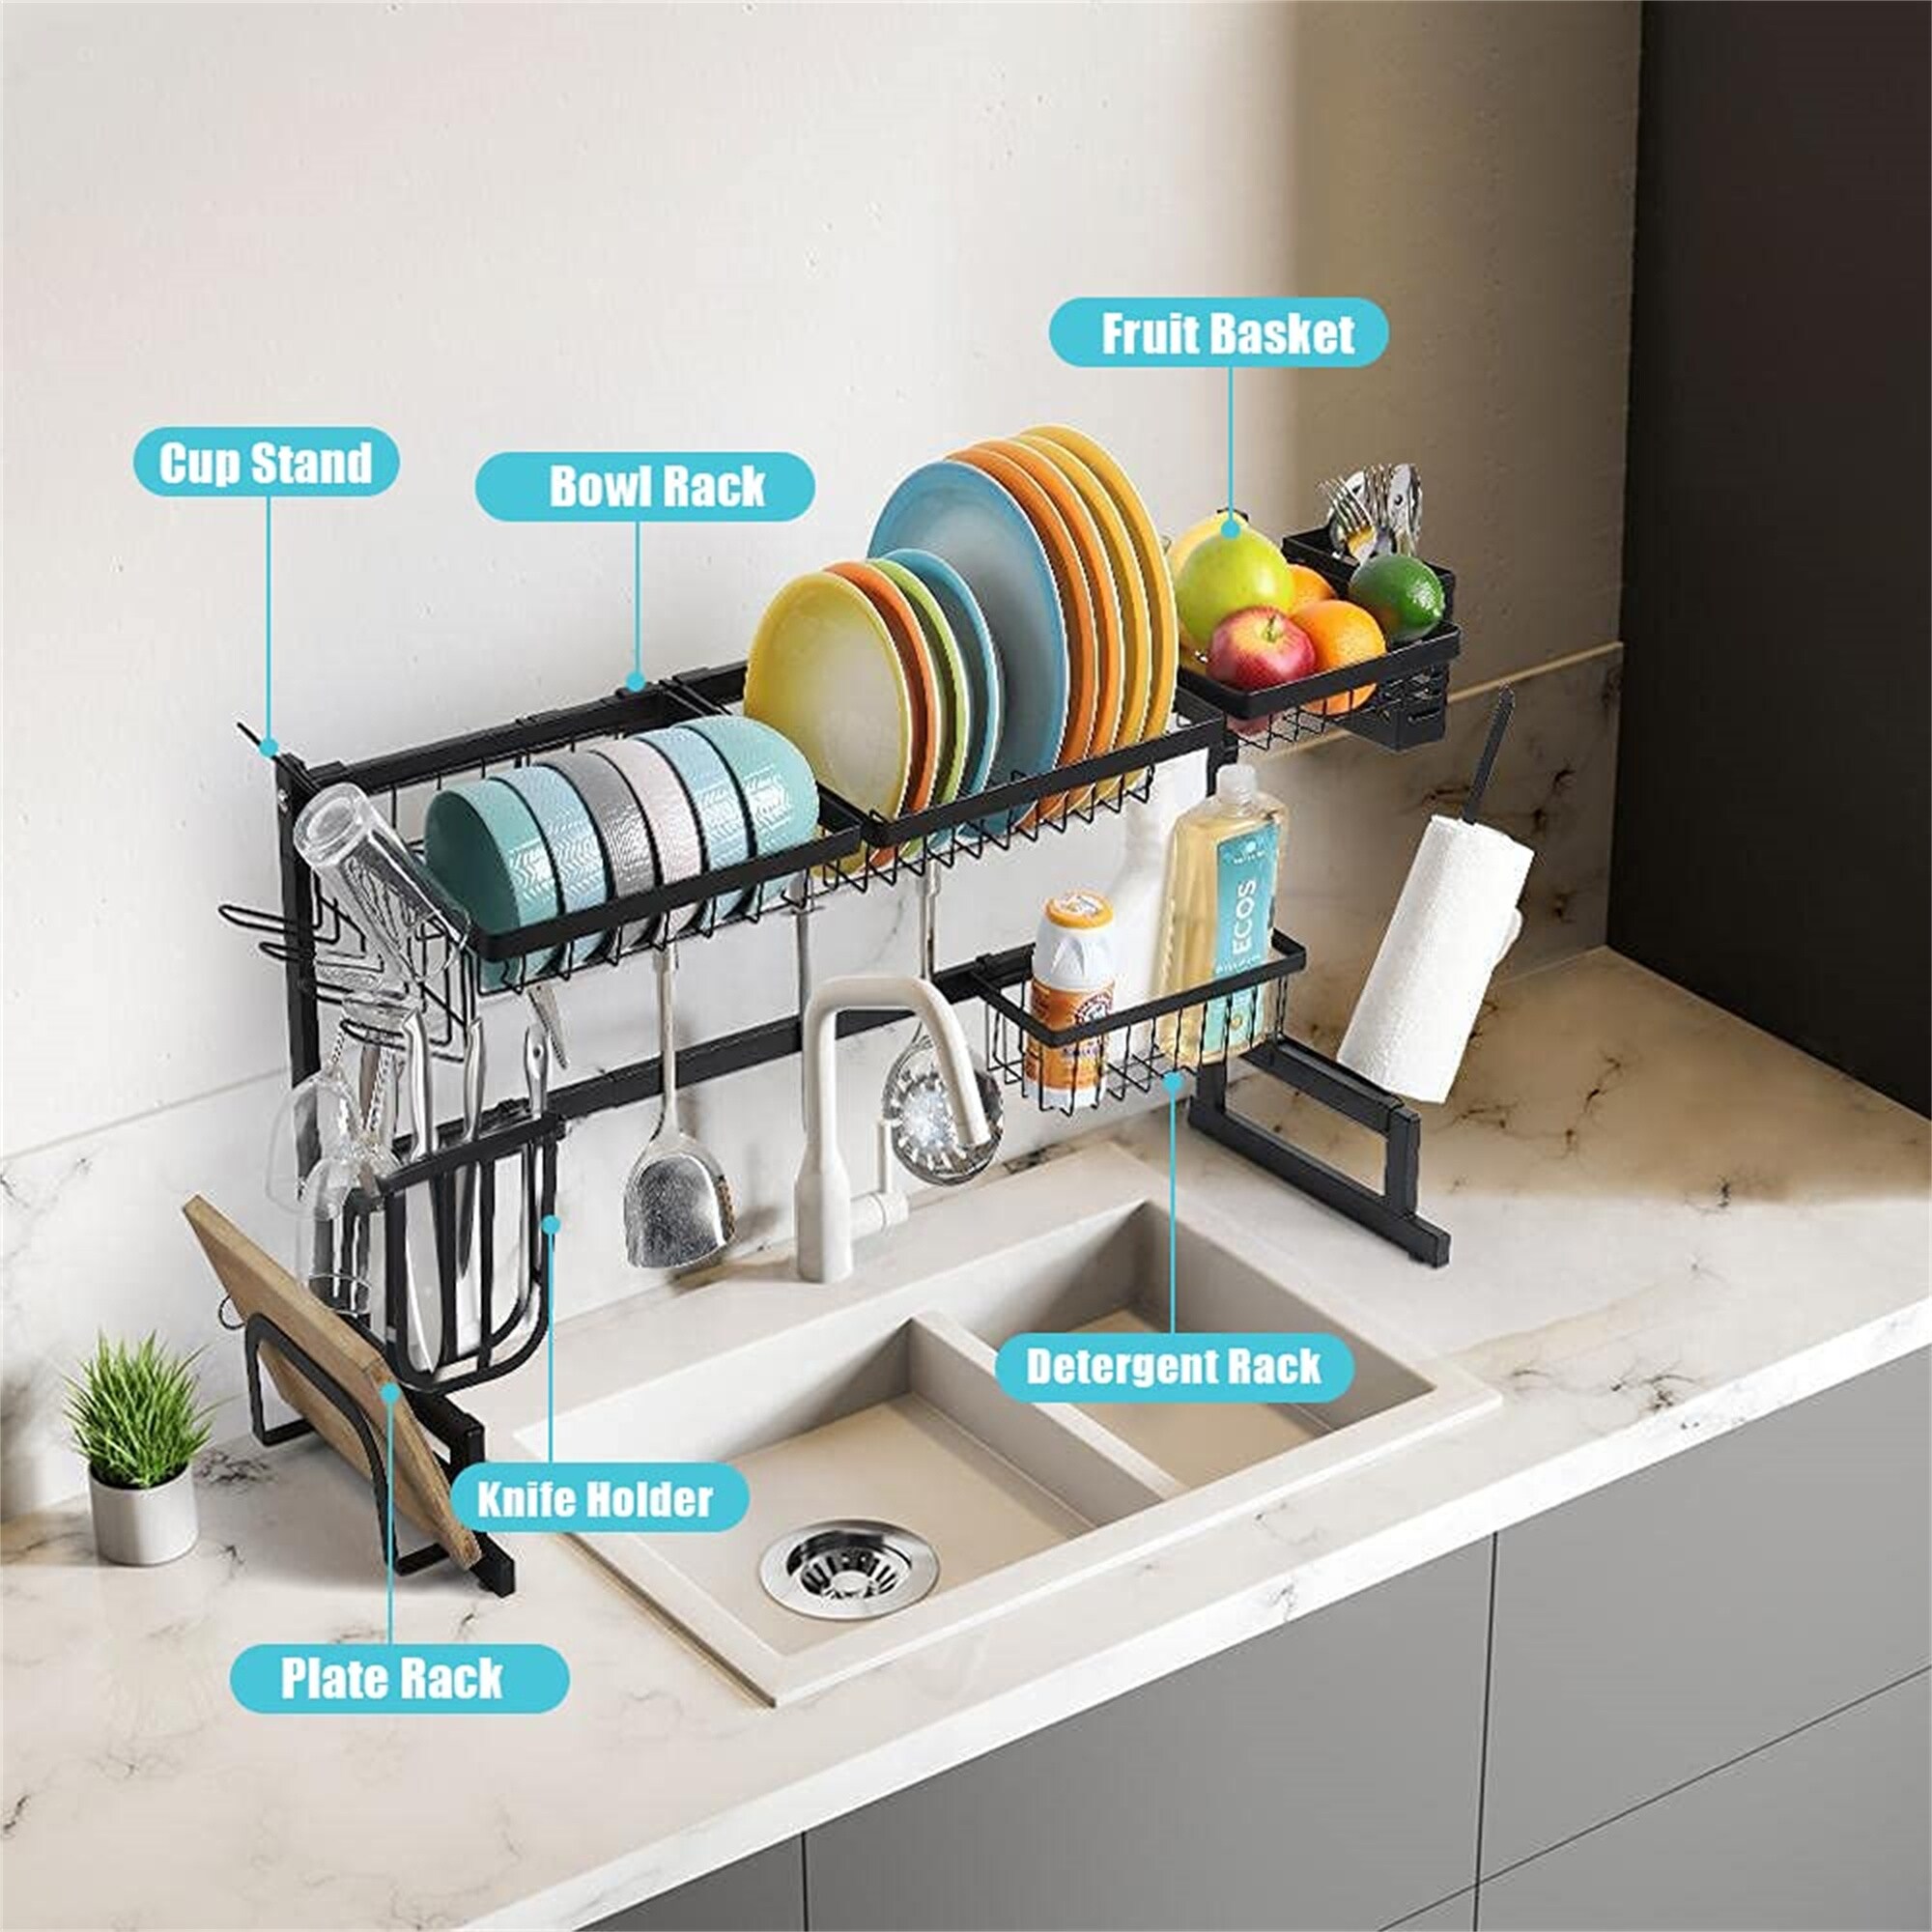 https://ak1.ostkcdn.com/images/products/is/images/direct/ac53c8653ac14488837e67ea330ba7188f16de24/2-Tier-Over-the-Sink-Dish-Rack%2C-Stainless-Steel%2C-Black.jpg